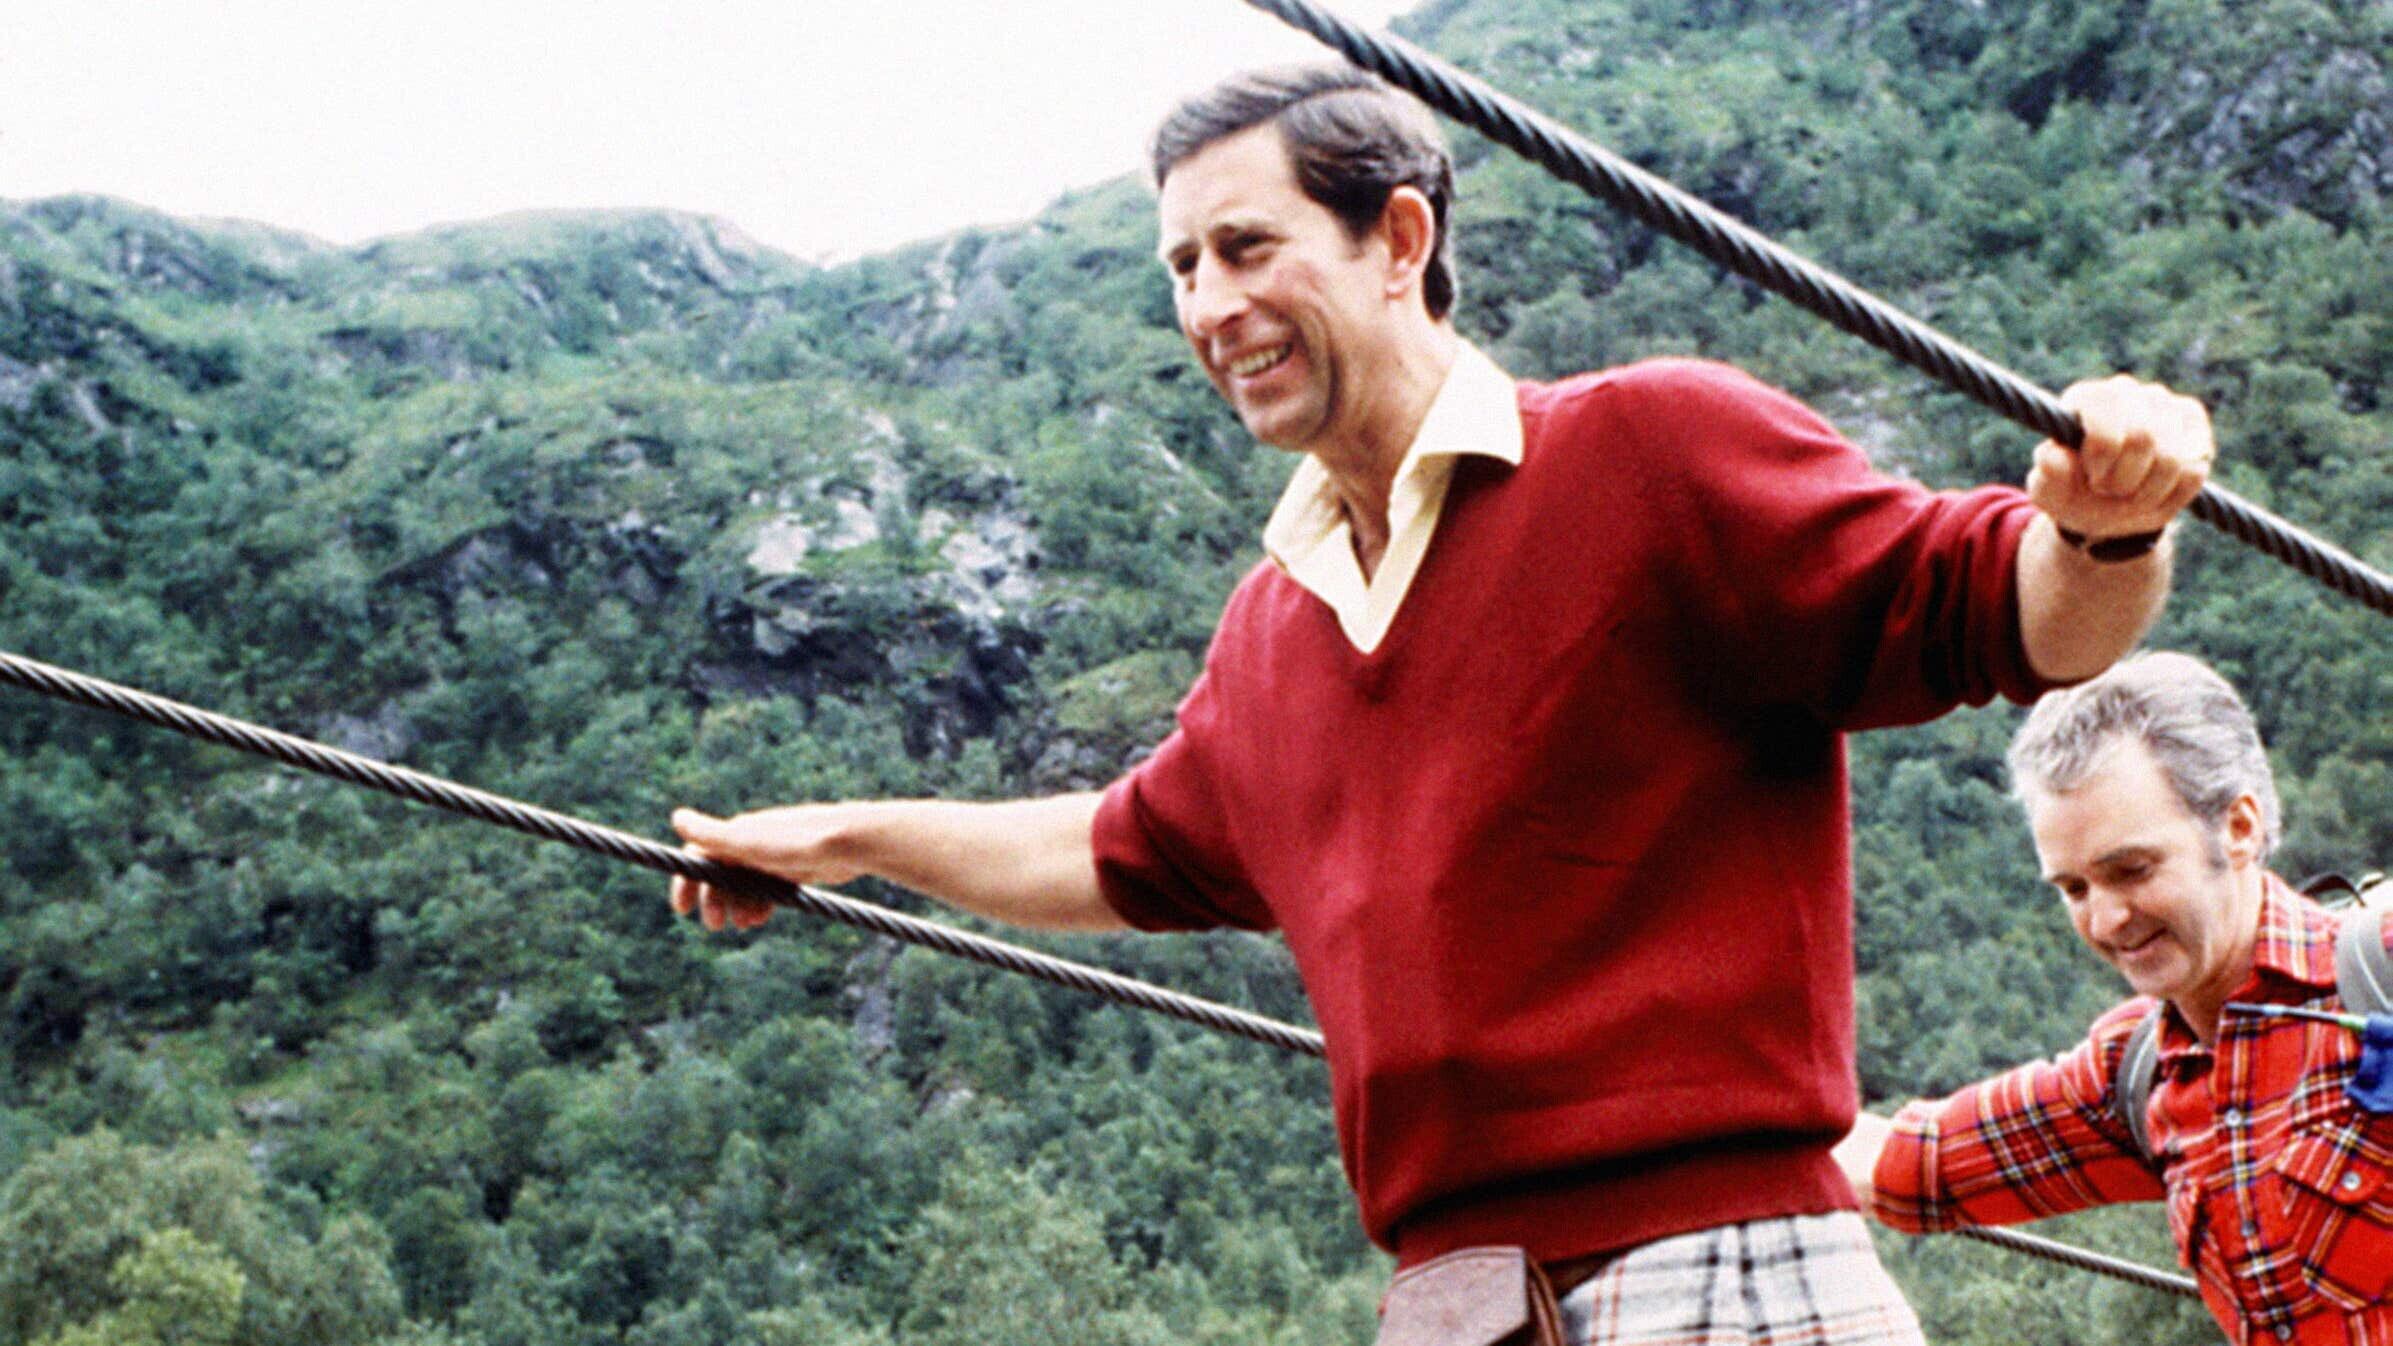 The then-Prince of Wales negotiating a two-inch wide wire bridge during a trek in the foothills of Ben Nevis with the Lochaber Mountain Rescue Team in 1987 (PA)